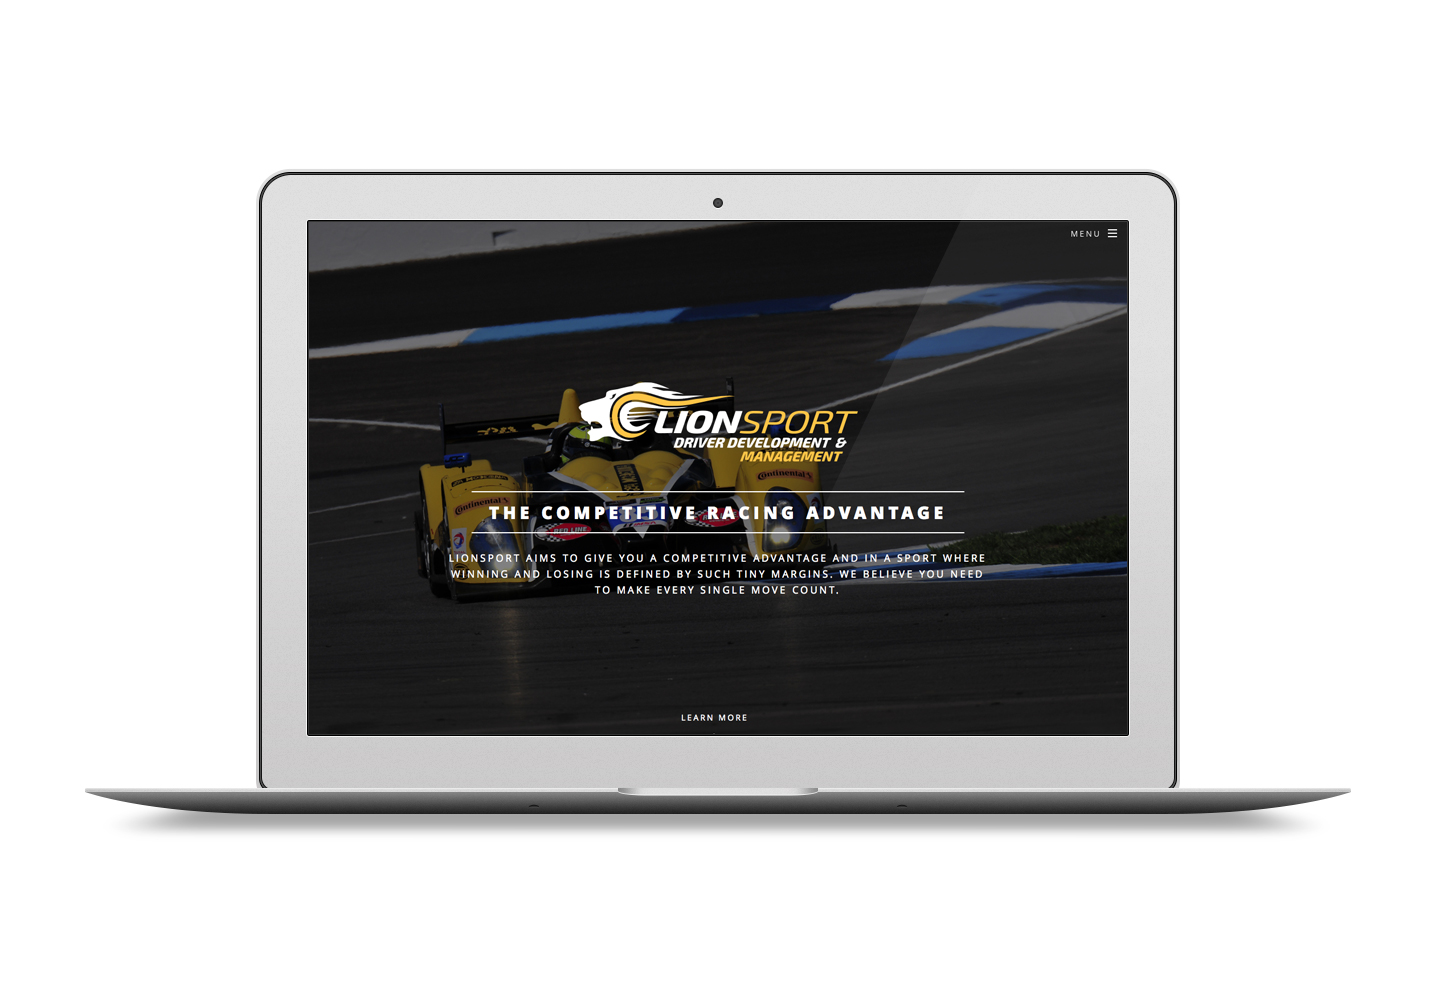 Lionsport Professional Driver Management and Coaching